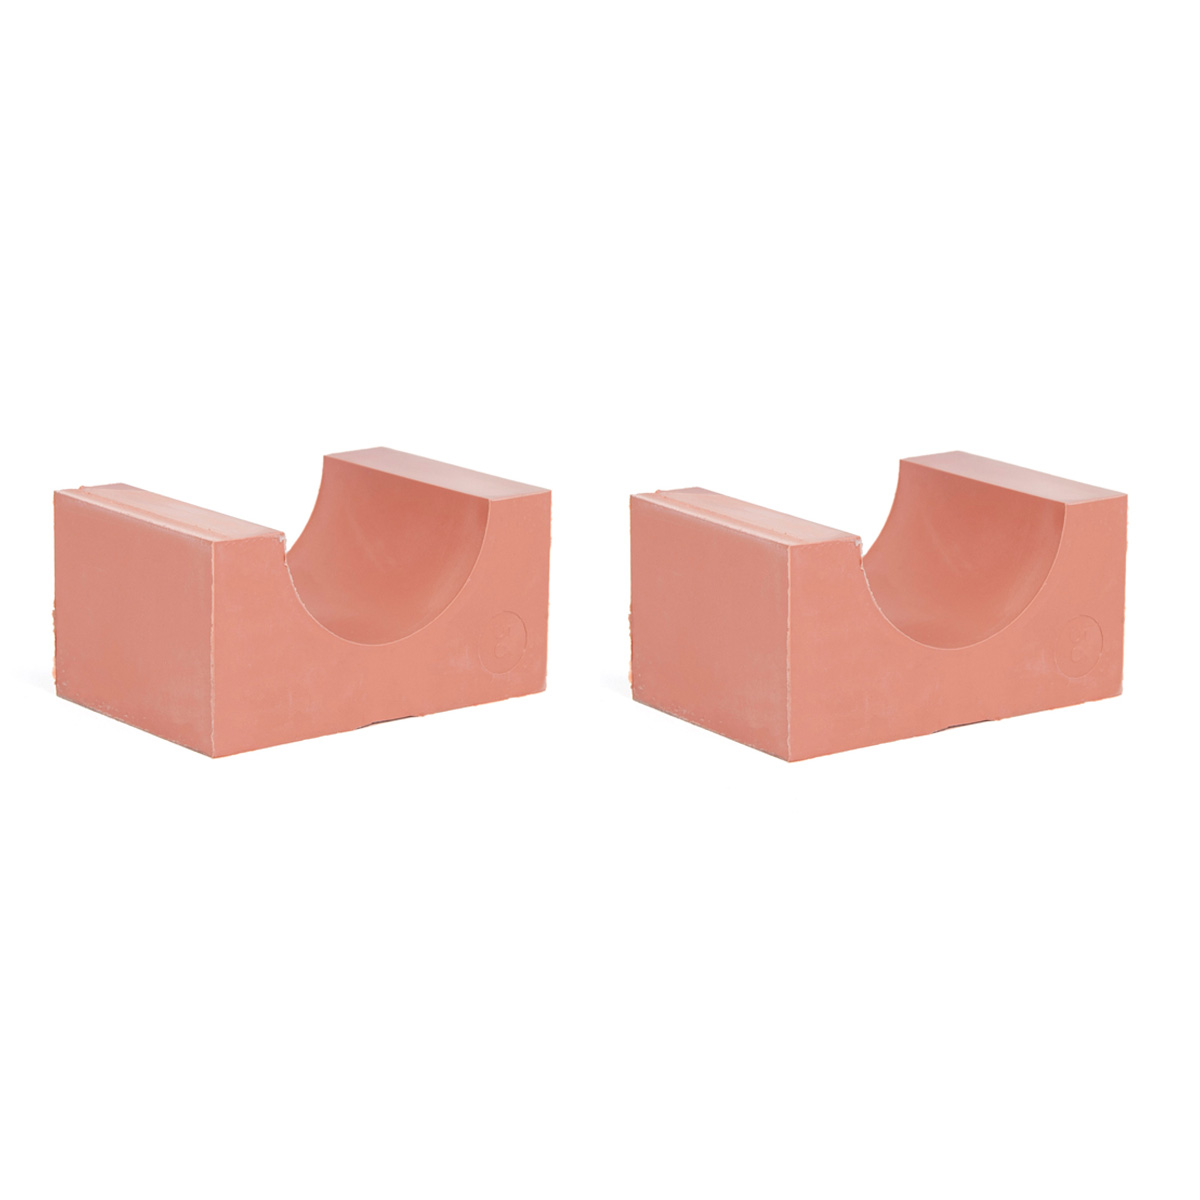 90-56*2 Set of 2 half insert block lycron, 90-56 for cable/pipe diam. 55.5-57.5mm